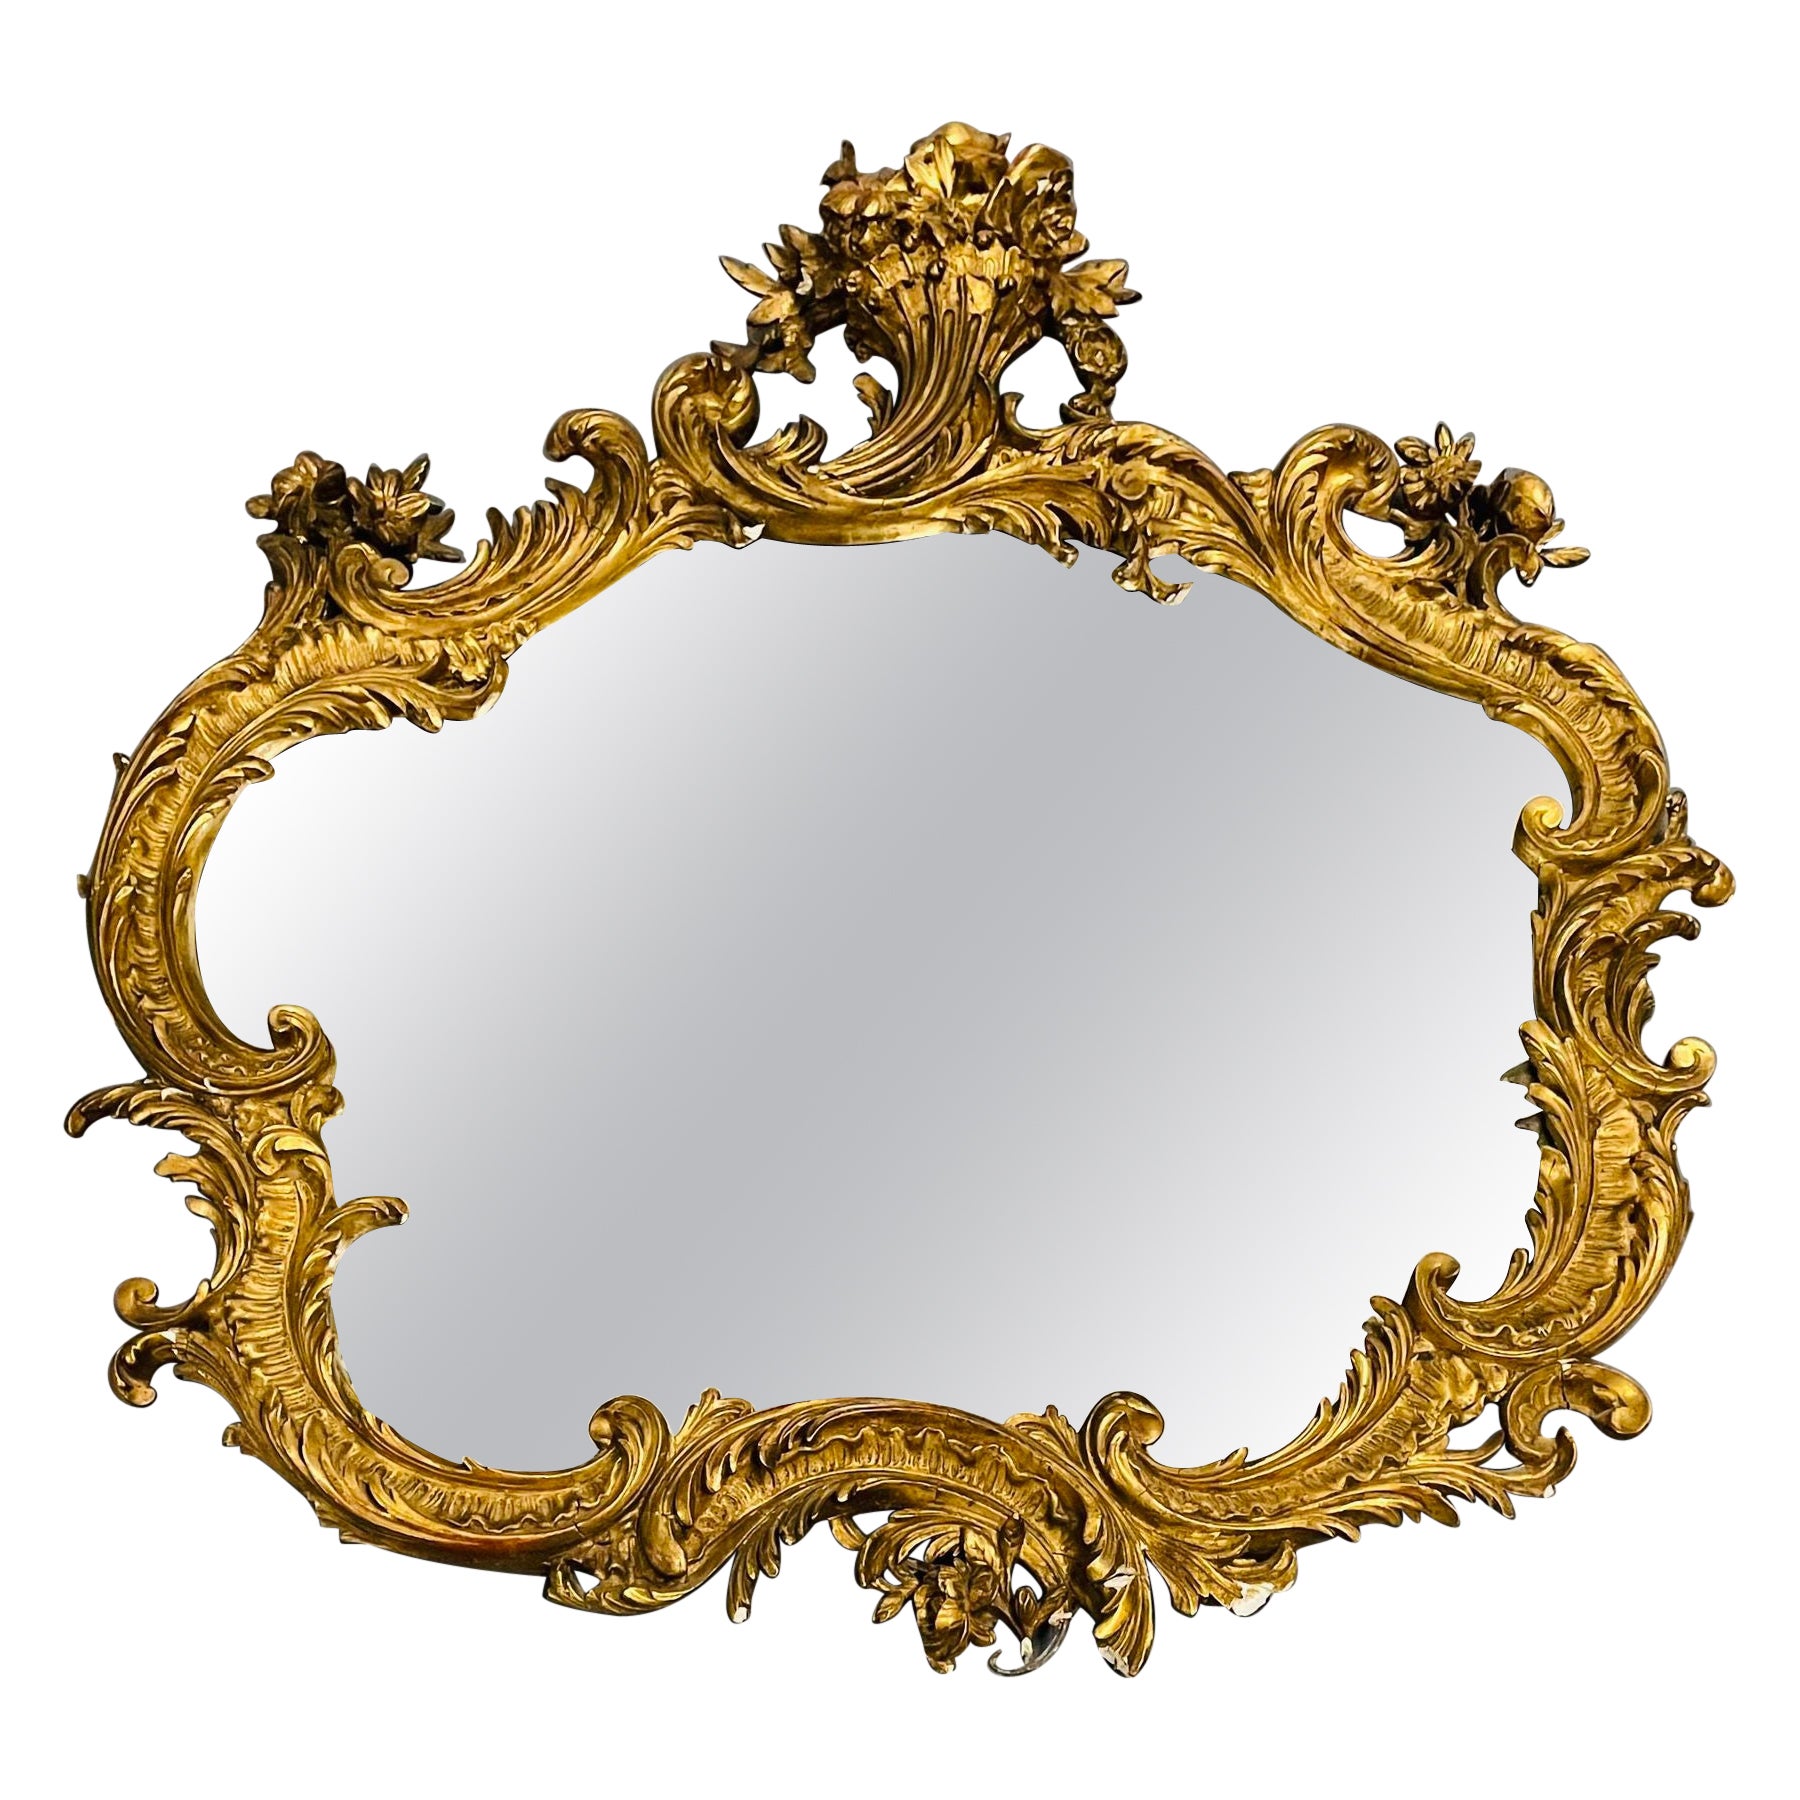 19th-20th Century Giltwood French Mirror, Wall or Console, Floral Decorated For Sale